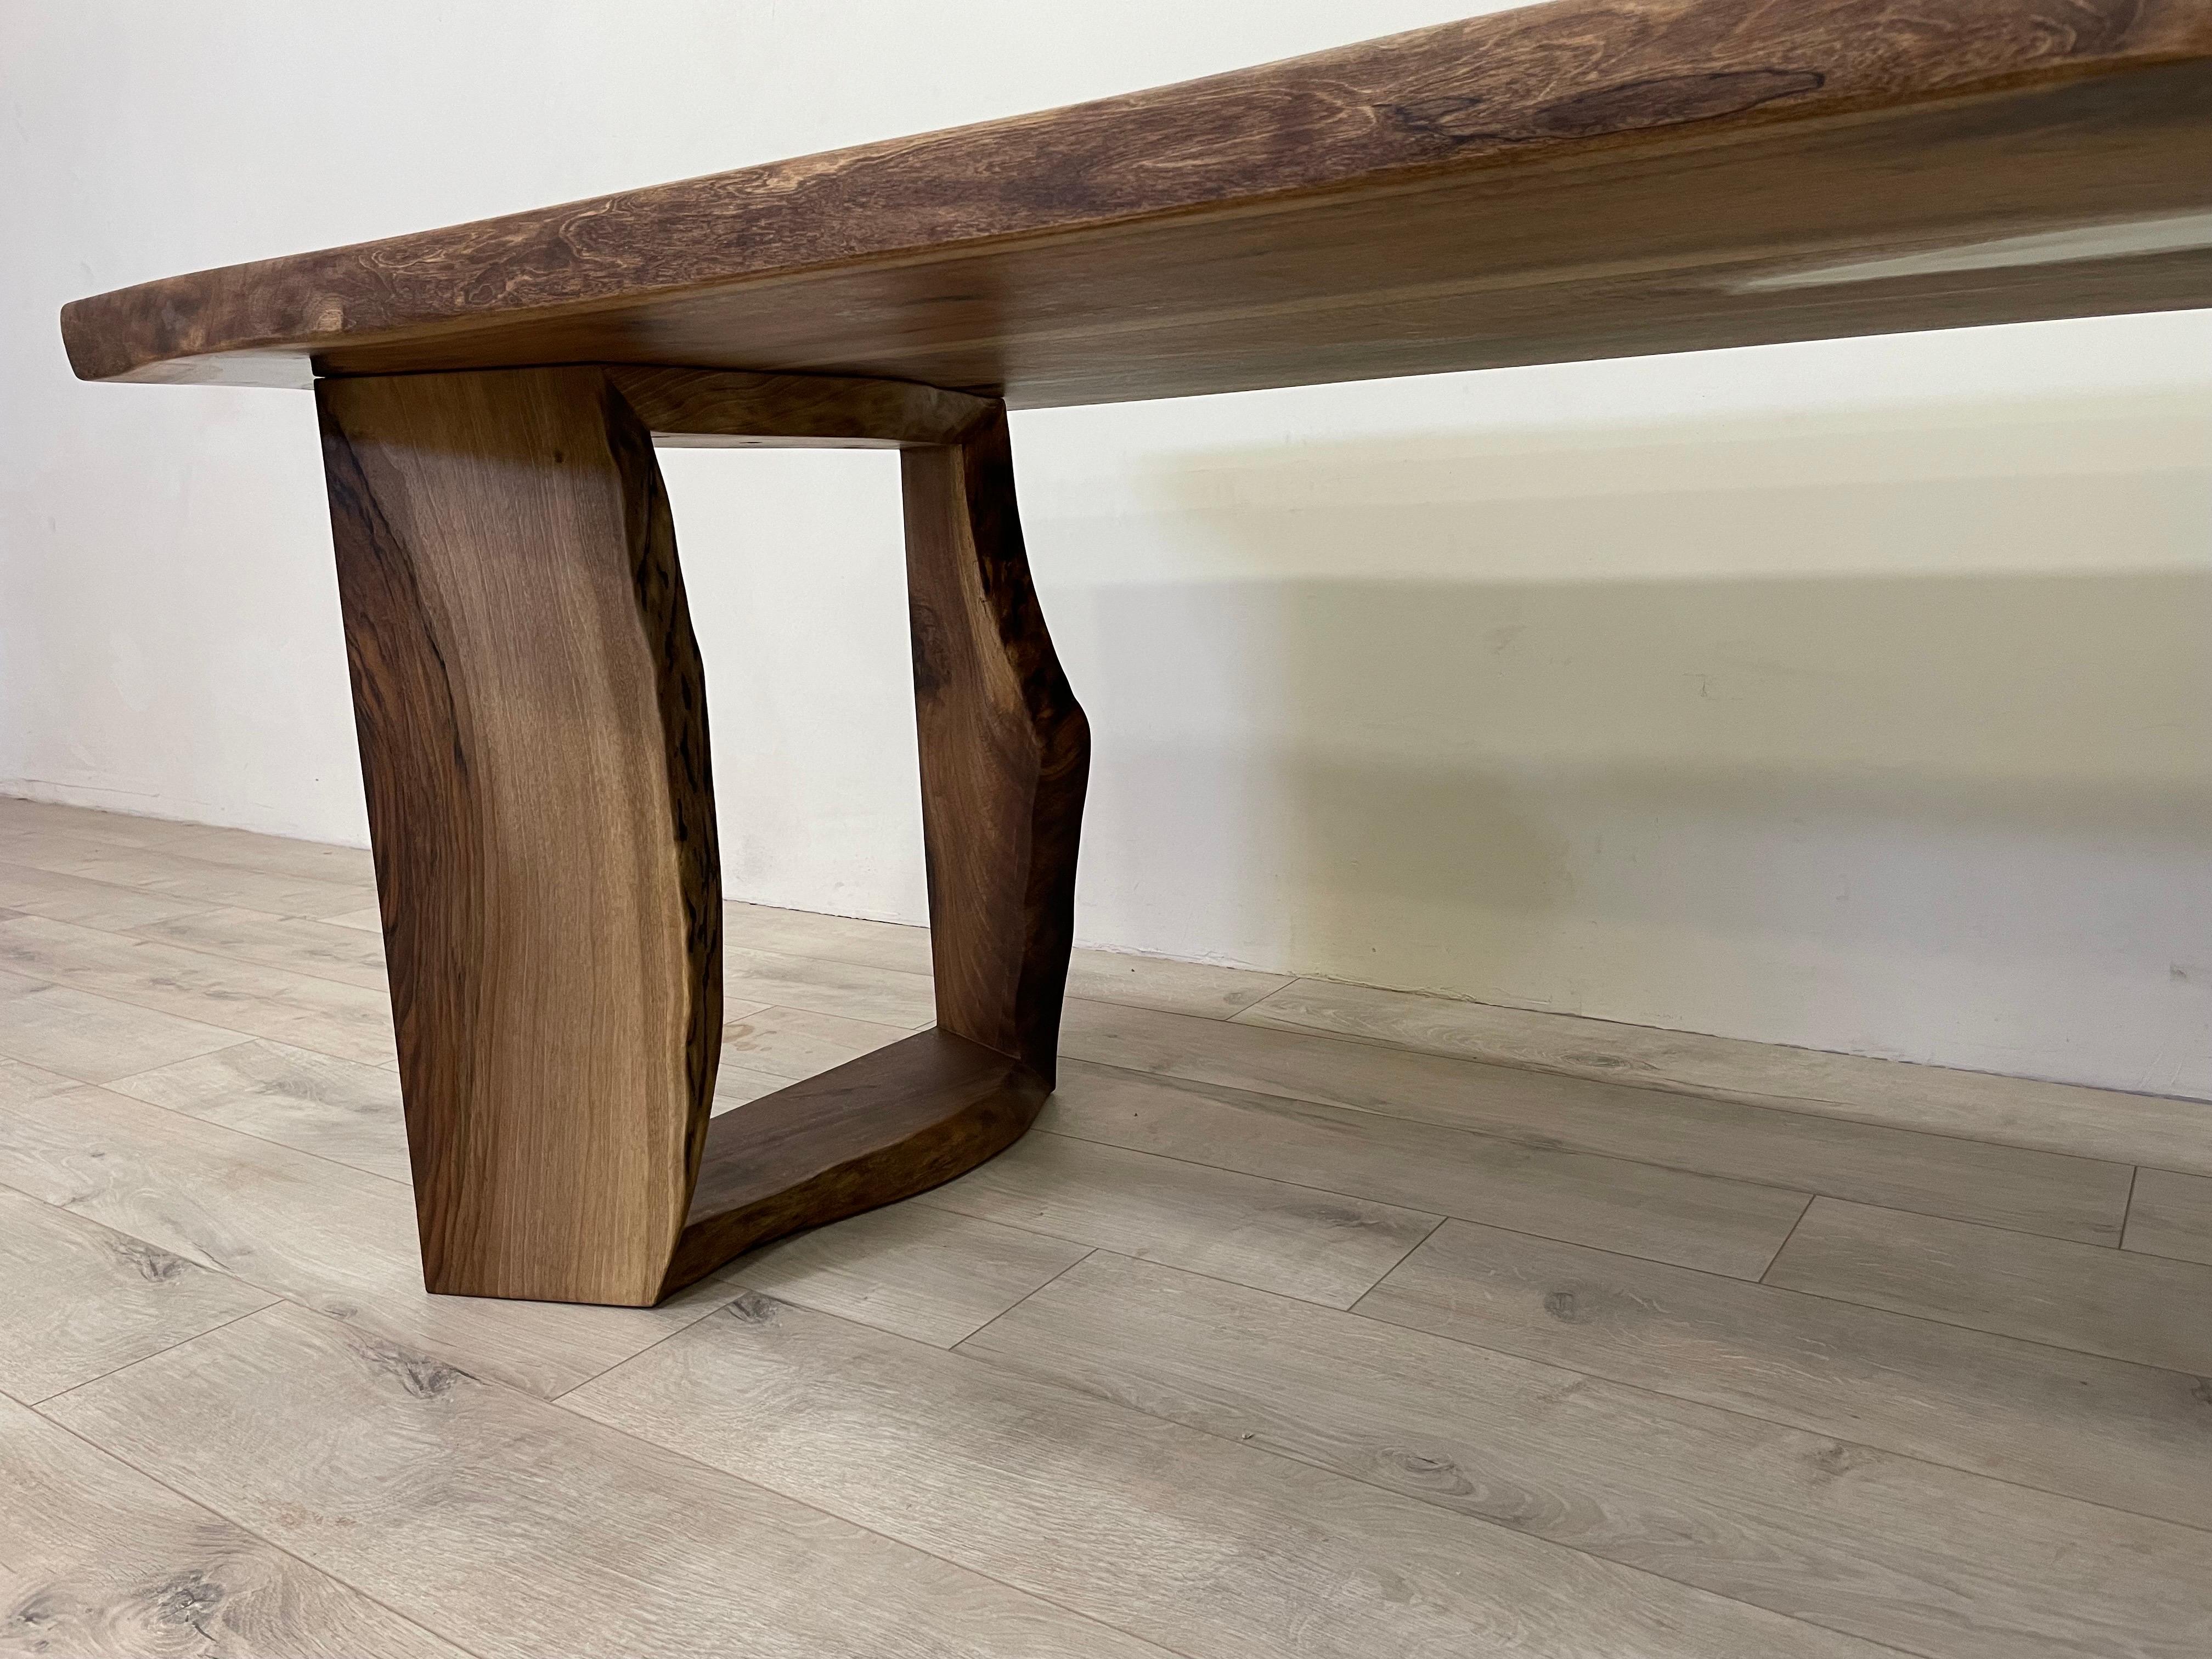 Contemporary Rectangular Natural Form Pedestal Dining Table, Solid Walnut Wood, Made to Order For Sale